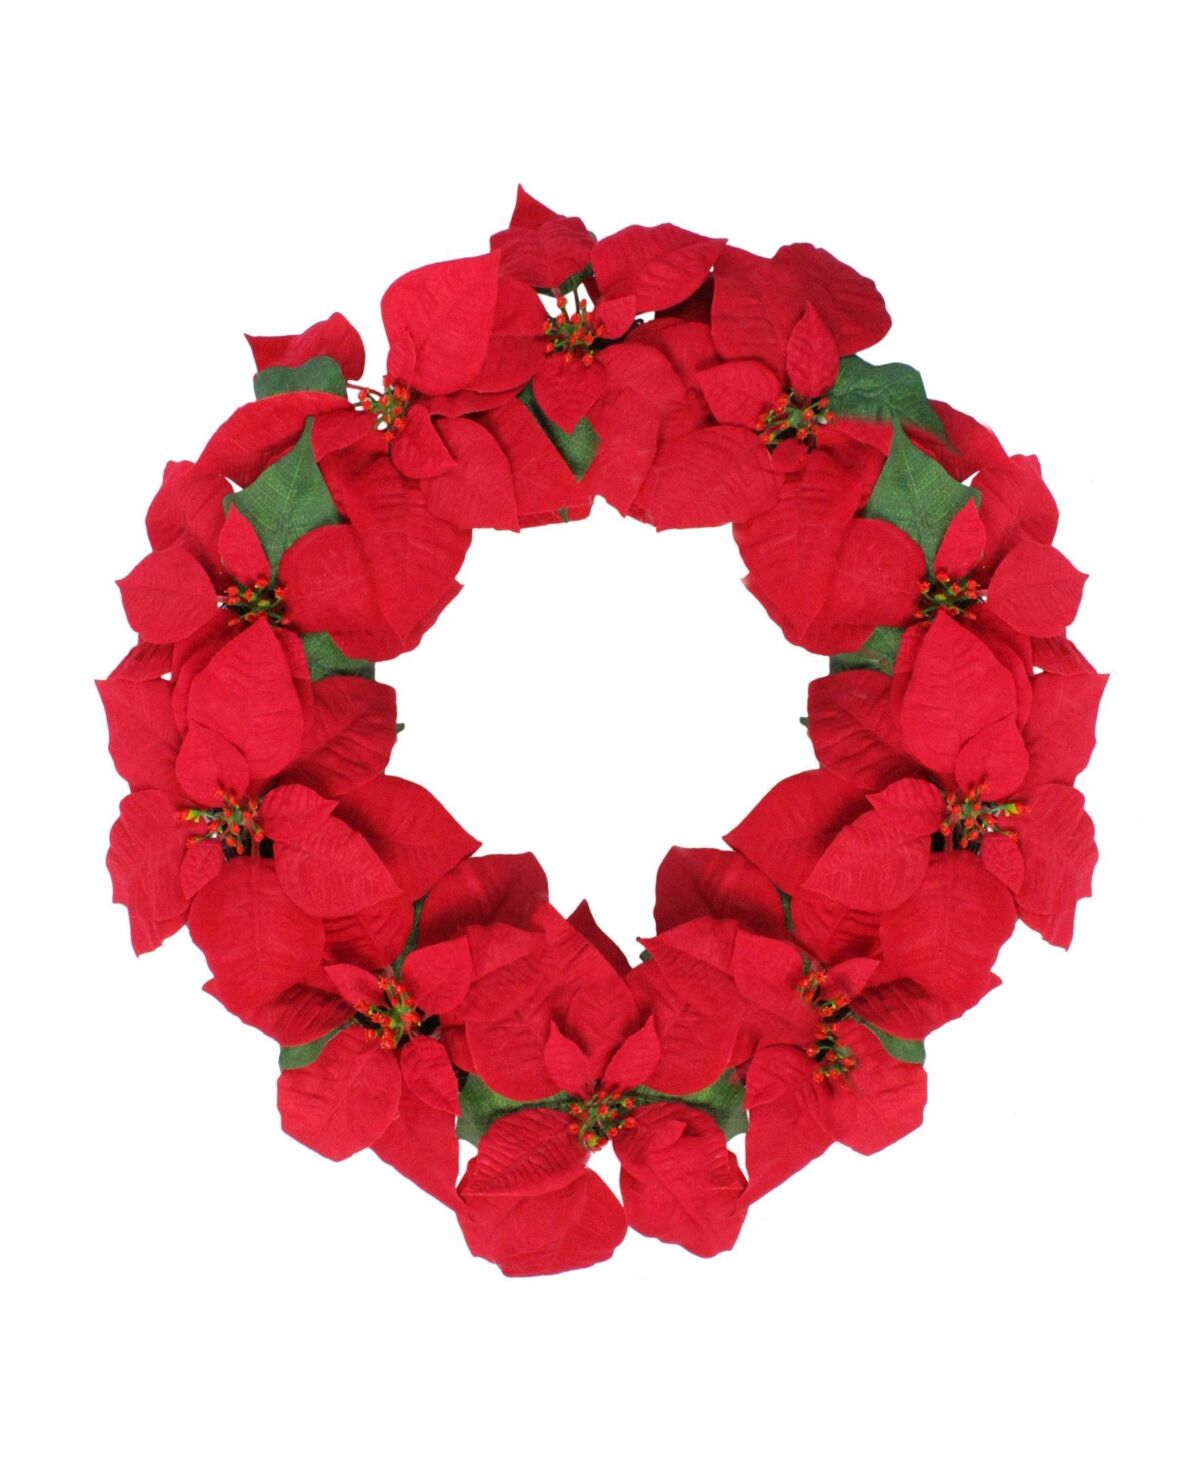 Northlight Unlit Artificial Poinsettia Flower Christmas Wreath - Red